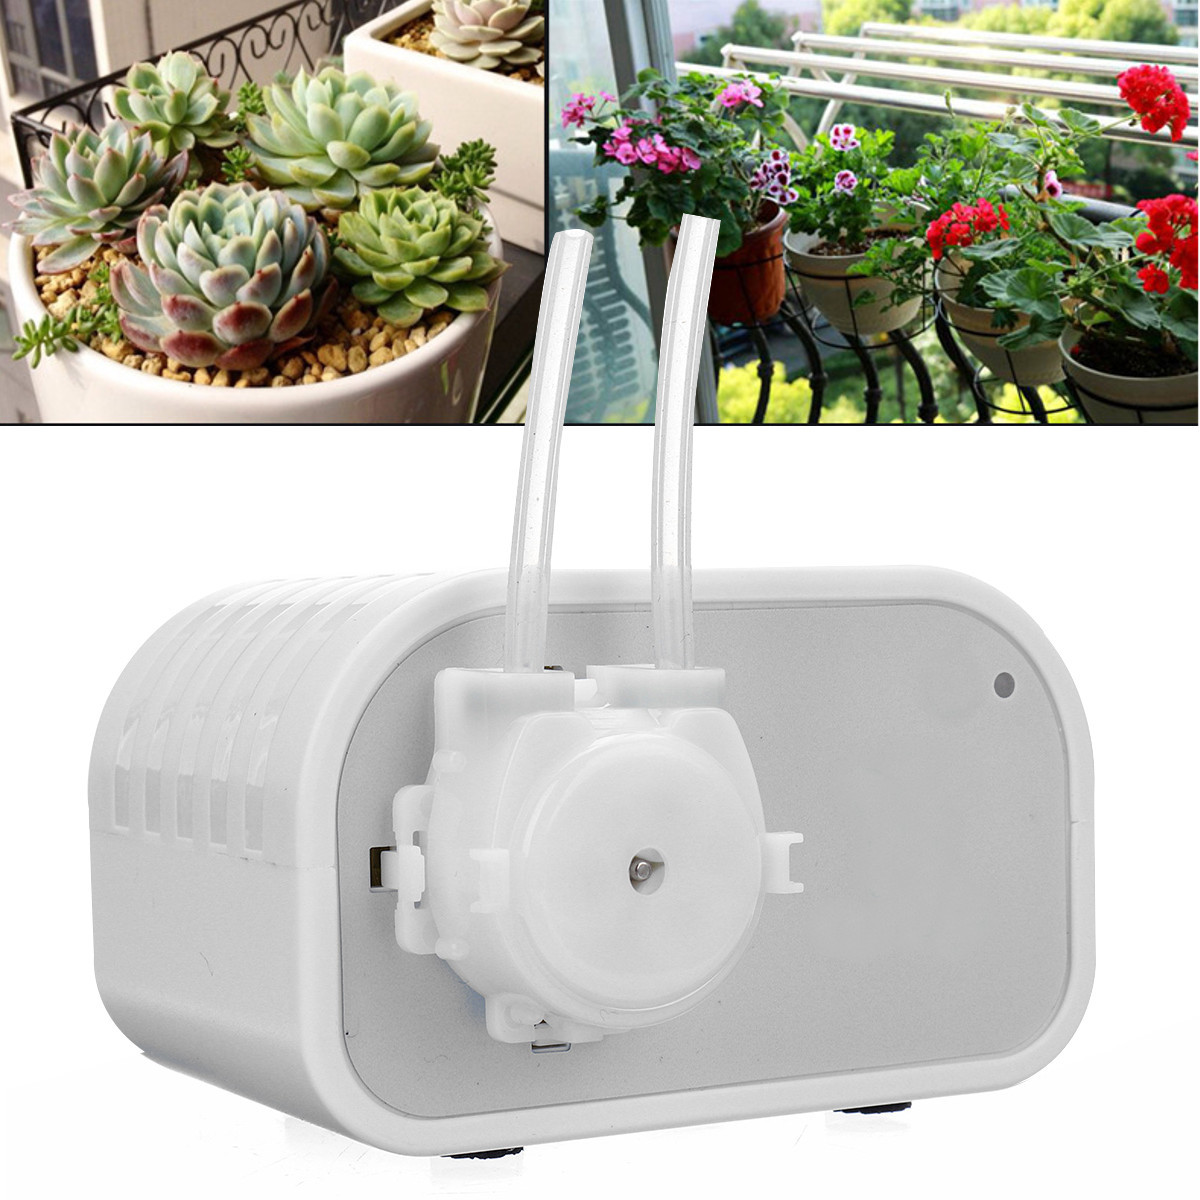 Intelligent-Watering-Device-Mobile-Phone-Control-Automatic-Drip-Irrigation-Kit-Garden-Potted-Plant-1707572-3